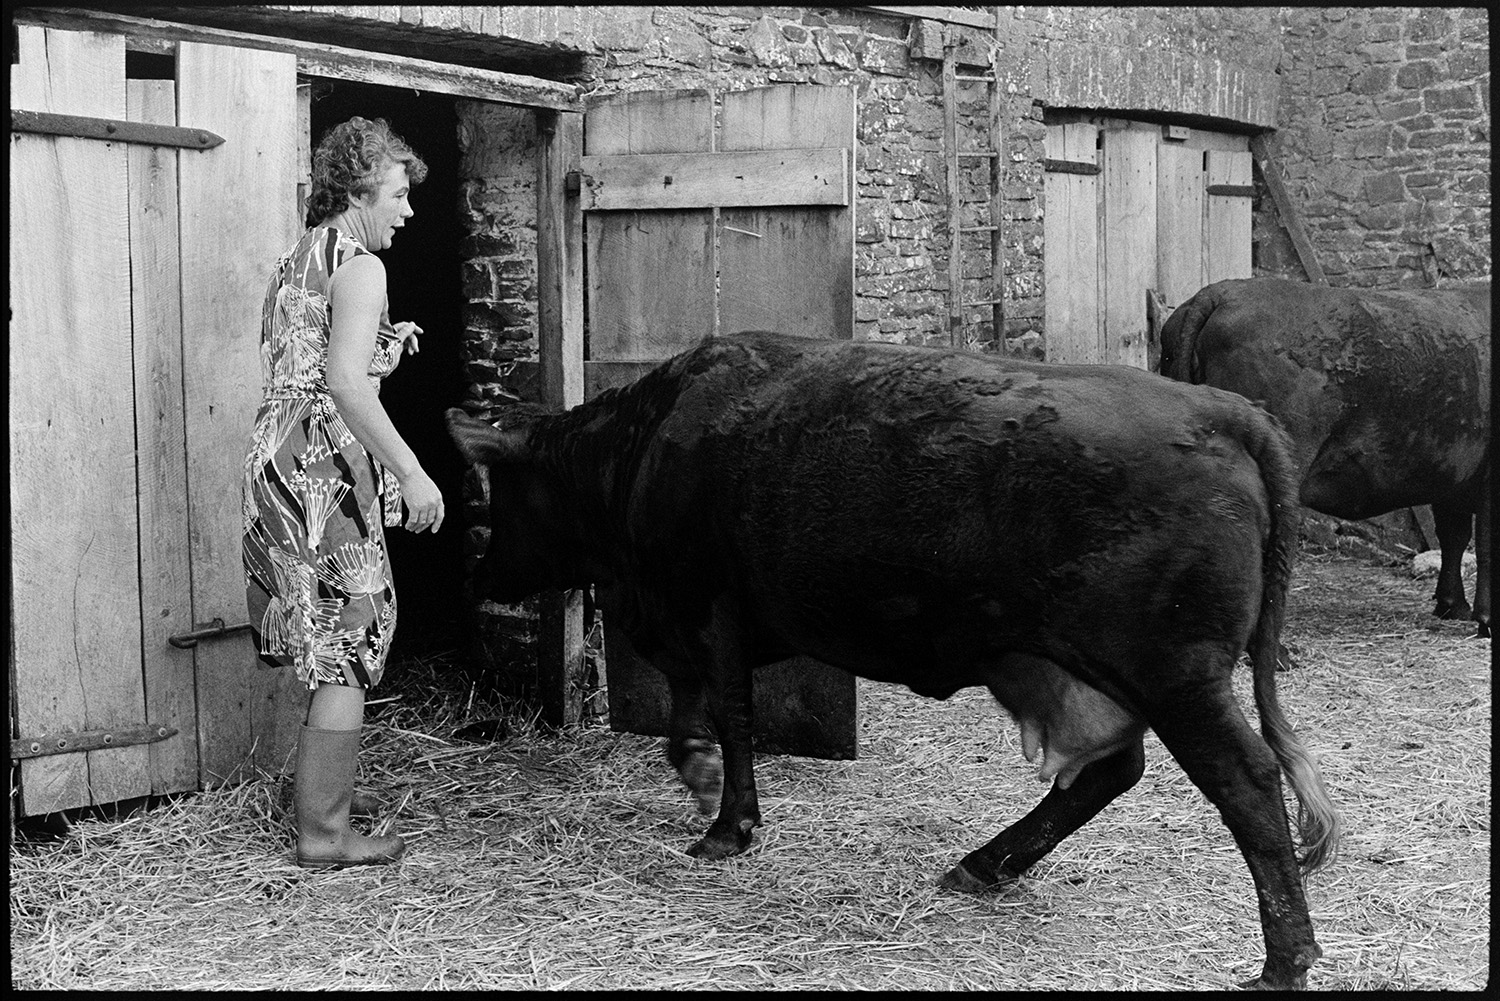 Horned Devon Red cows coming into farmyard to be milked.
[Mrs Elworthy opening a barn door to let horned Red Devon cows through to be milked at Narracott, Hollocombe.]